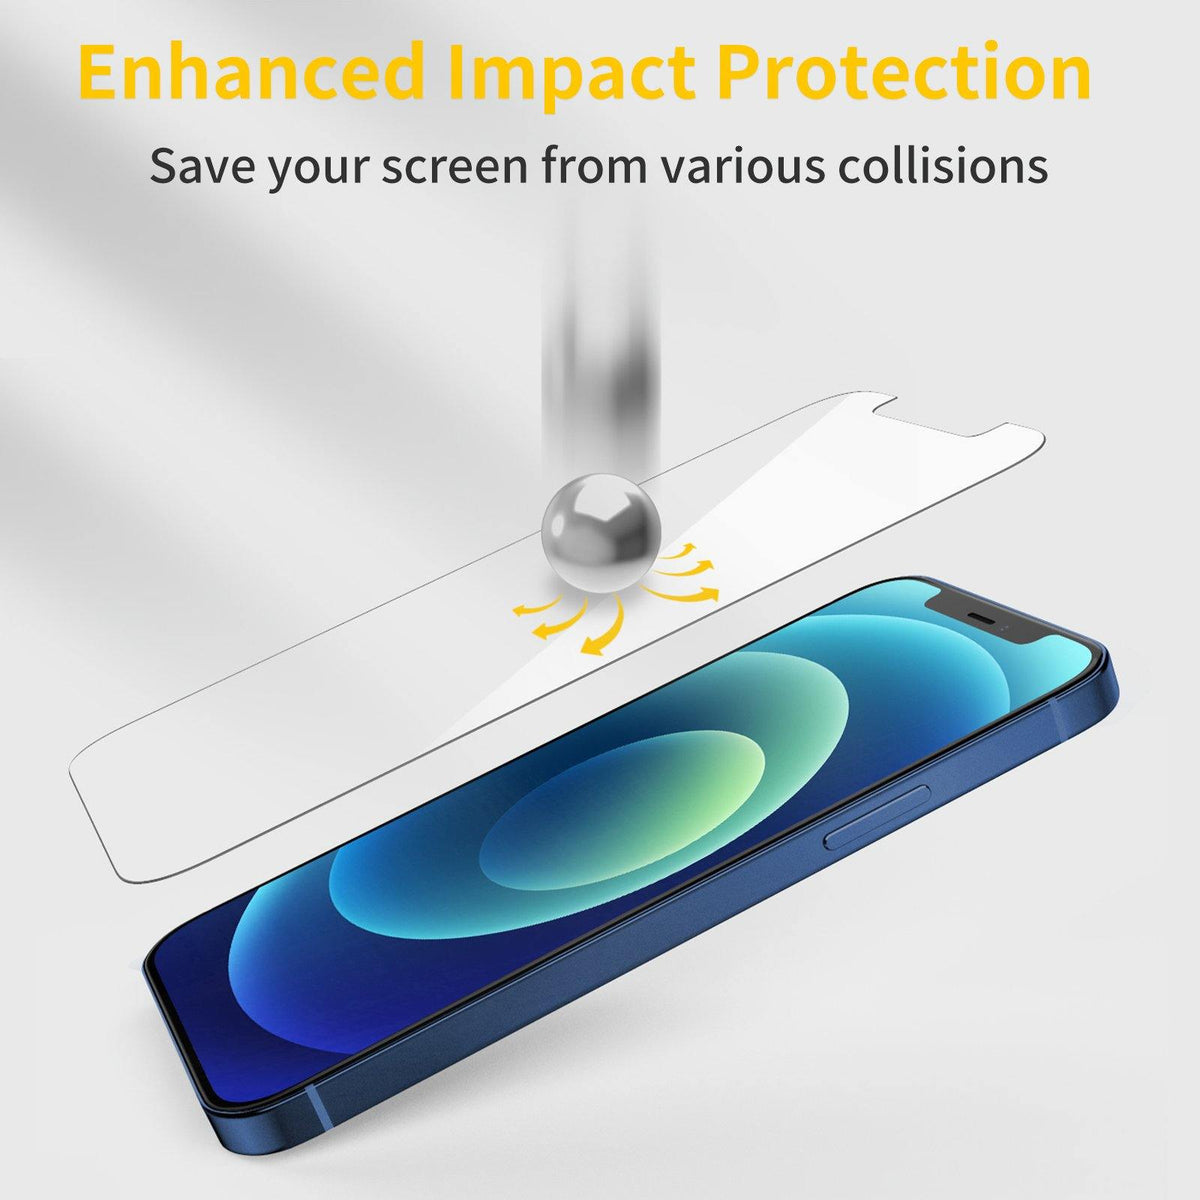 Tempered Glass Screen Protector for iPhone 12 - 3 Packs - Screen Protector